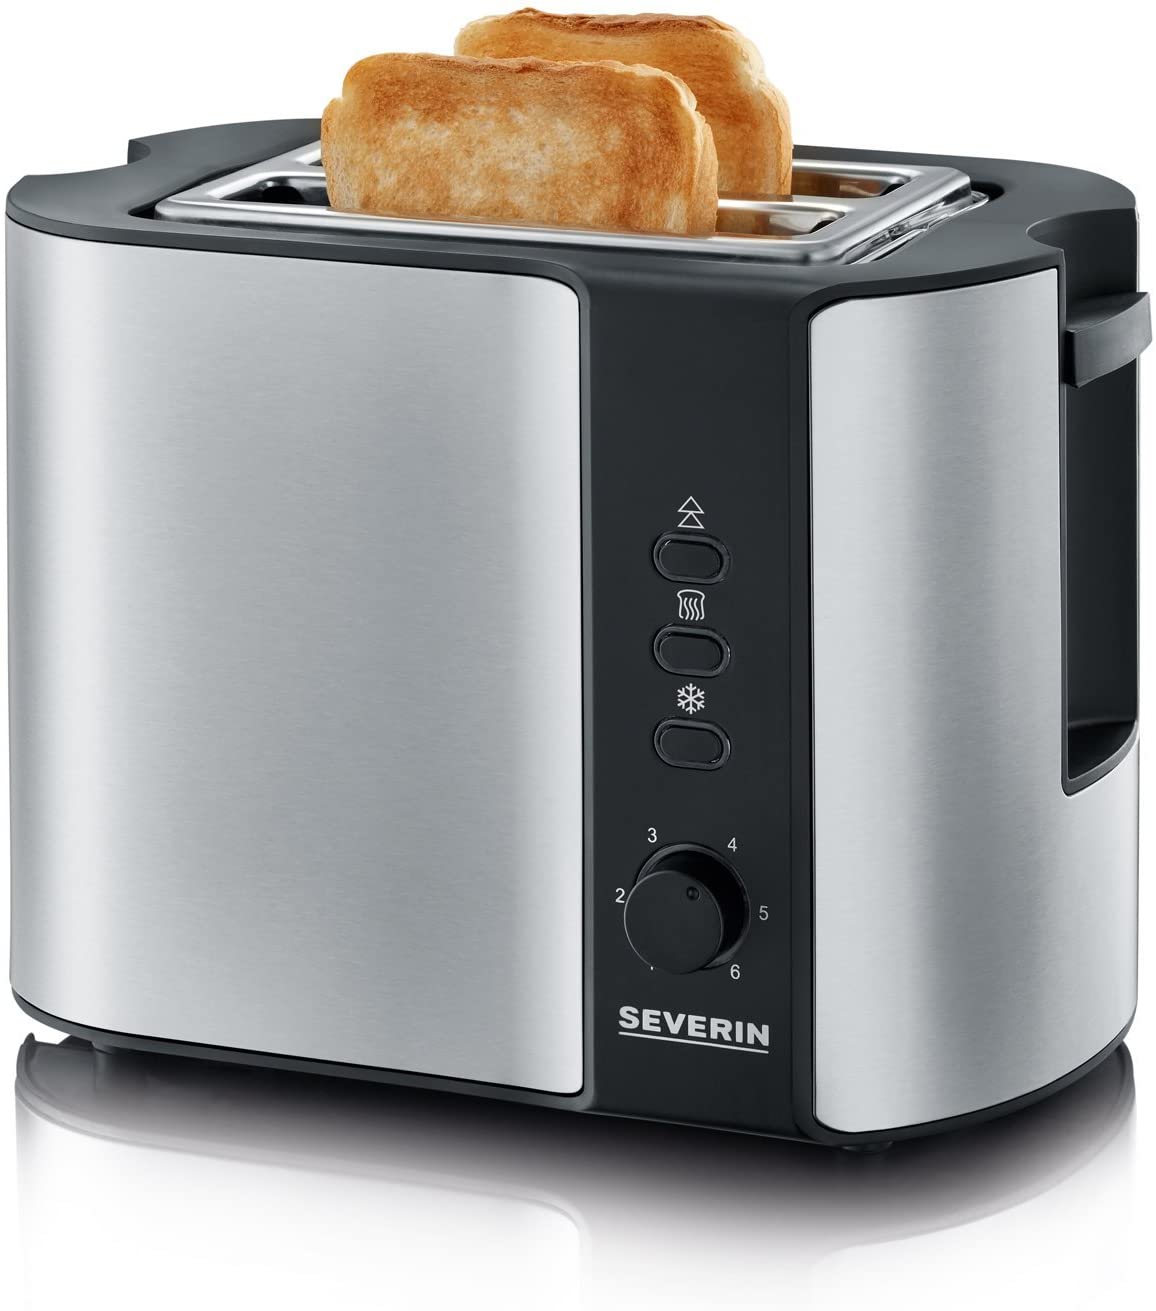 SEVERIN Automatic toaster, 2 slotted chambers, for up to 4 slices of bread, 1,400 W, AT 2590, stainless steel/black & WK 3468 glass kettle (approx. 2,200 W, 1 litre) stainless steel/black